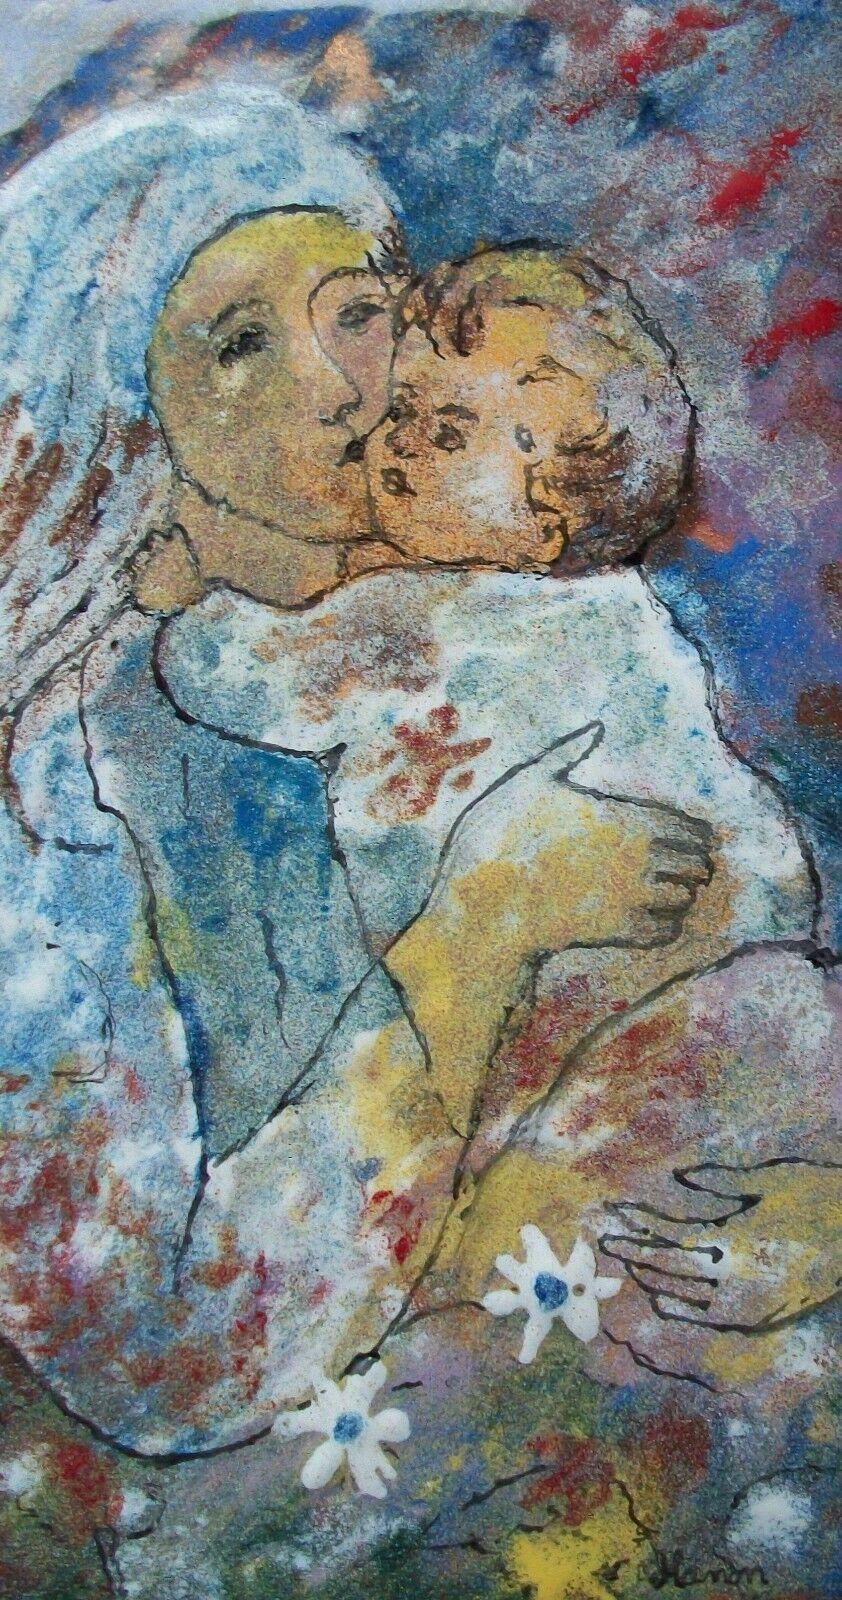 V. HANON (unknown artist/maker) - 'Mother & Child' - Modernist enamel painting on copper panel - float mounted on wood panel - hanger to the back - country of origin unknown - mid 20th century. 

Good vintage condition - minor enamel edge chip (as